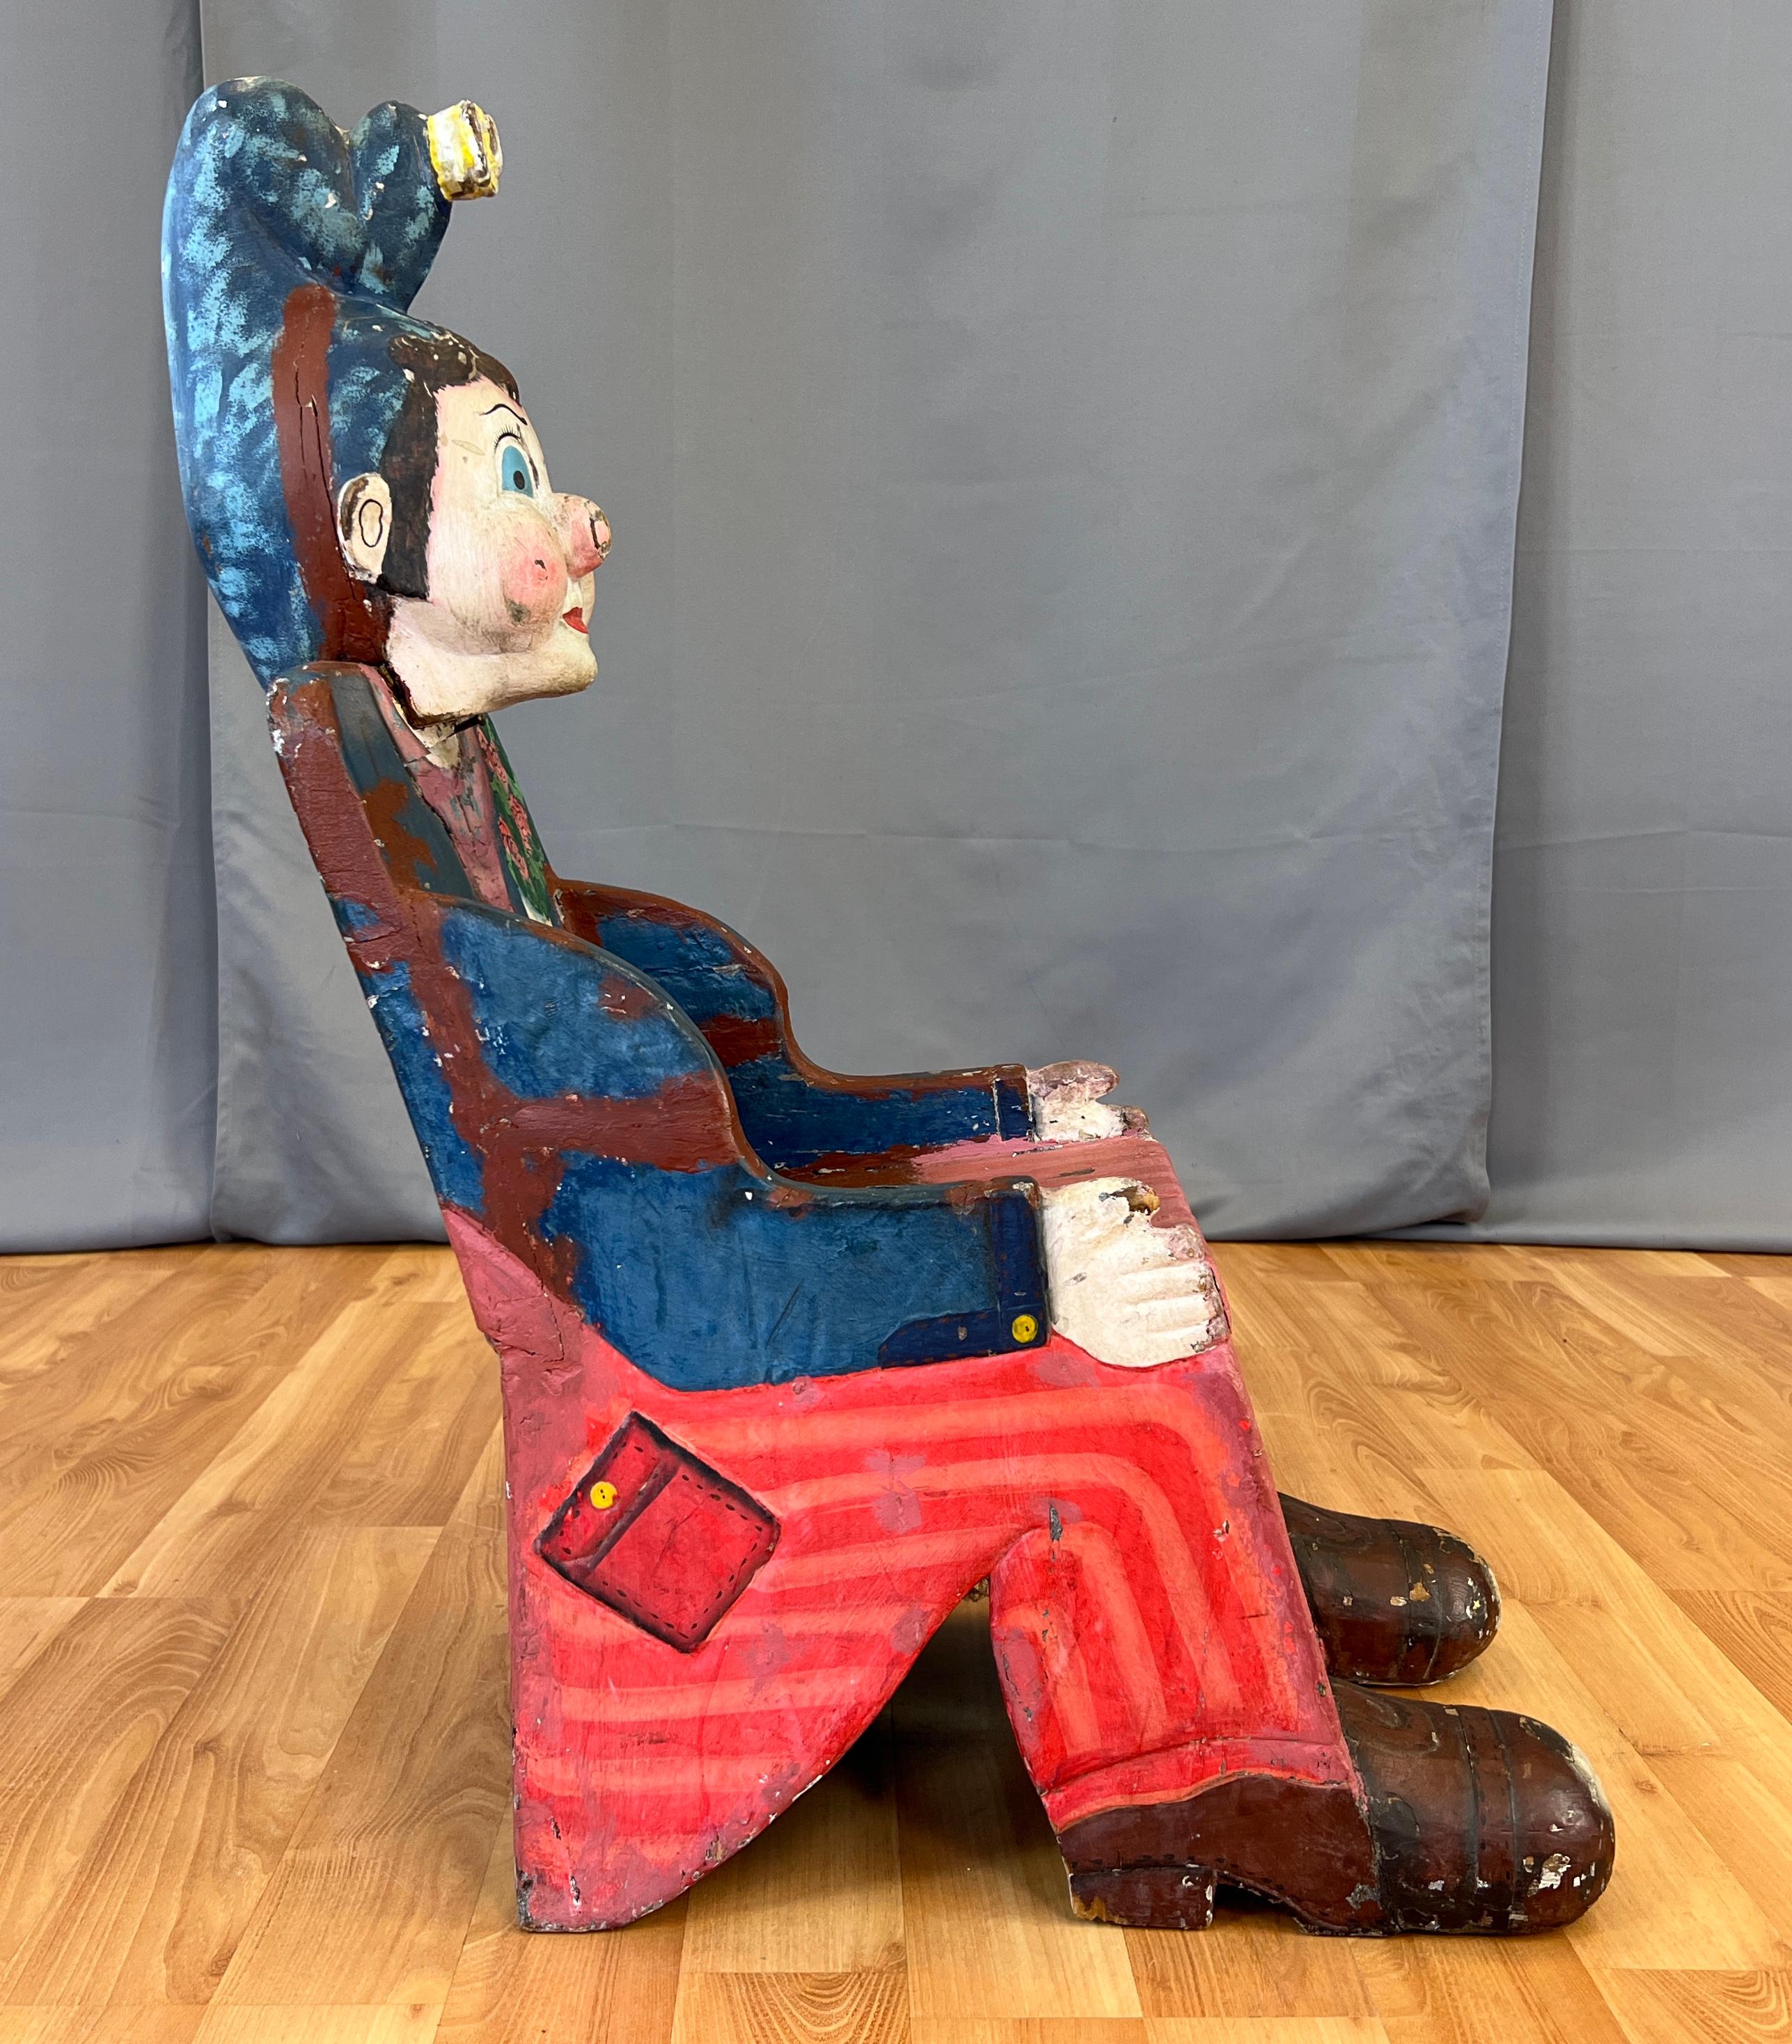 Circa 1950s French Childs Carnival/Circus Prop Chair In Fair Condition For Sale In San Francisco, CA